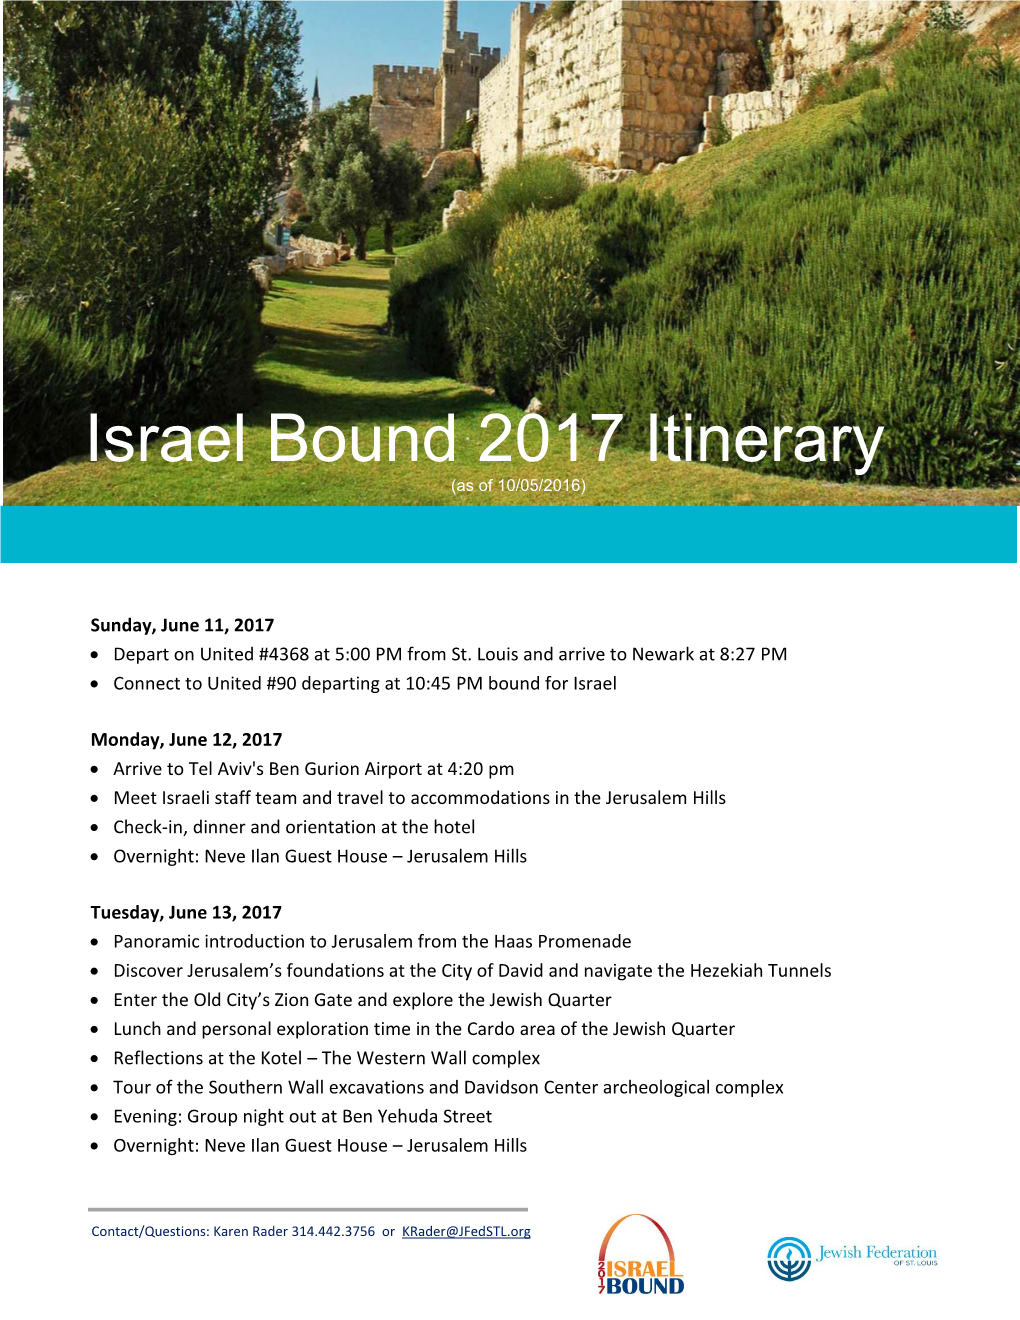 Israel Bound of St. Louis Israel Bound 2017 Itinerary